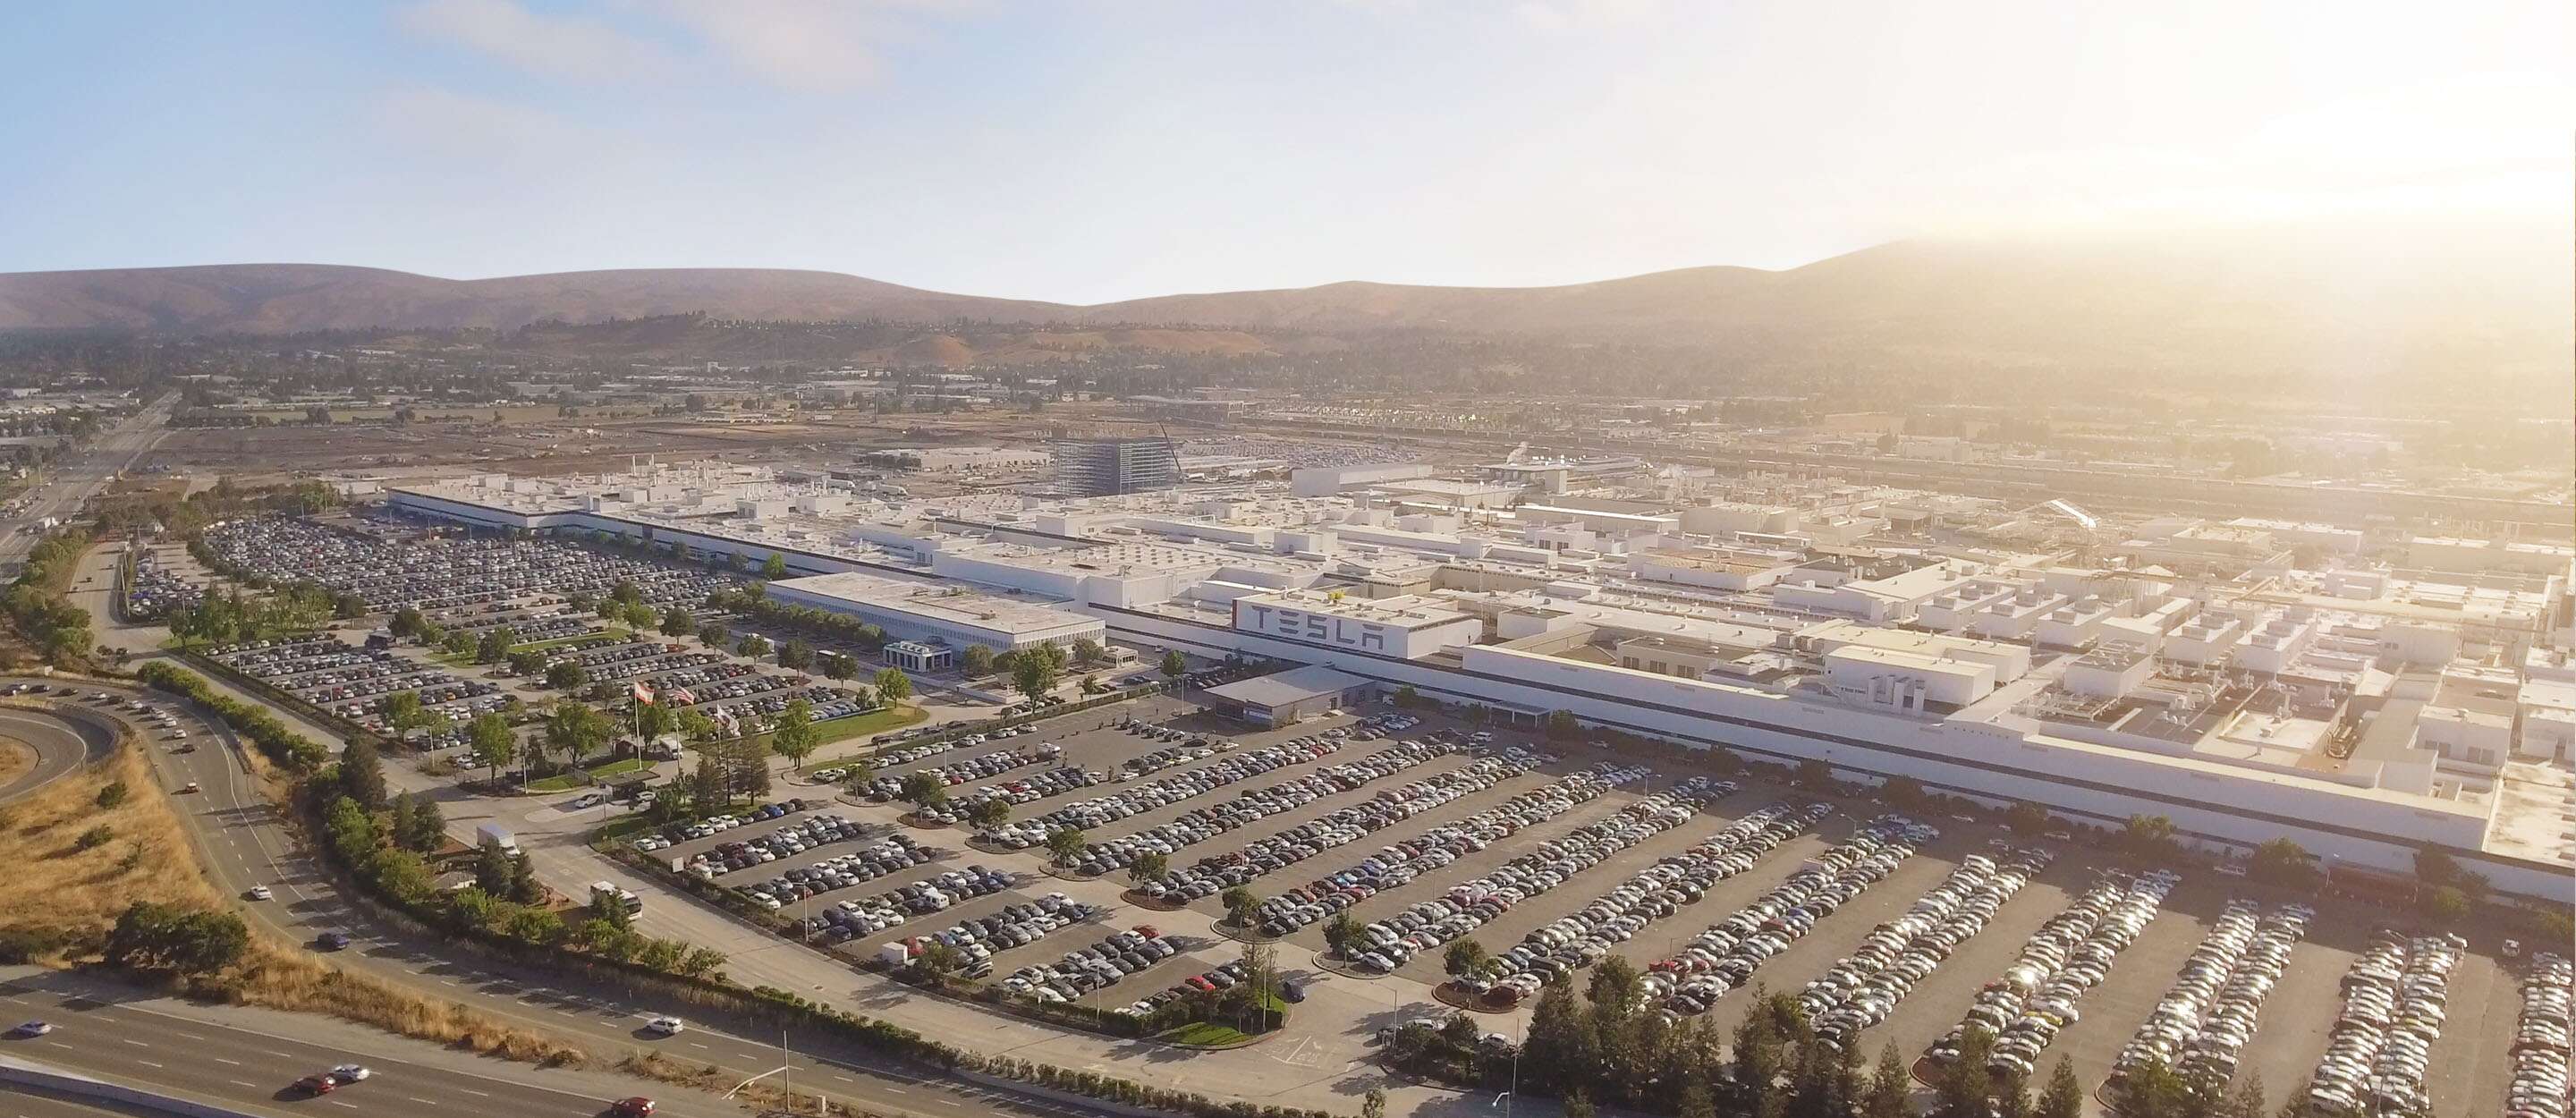 Tesla and Medtronic Now Team Up To Produce Ventilators at Fremont Factory, Soon Giga NY As Well